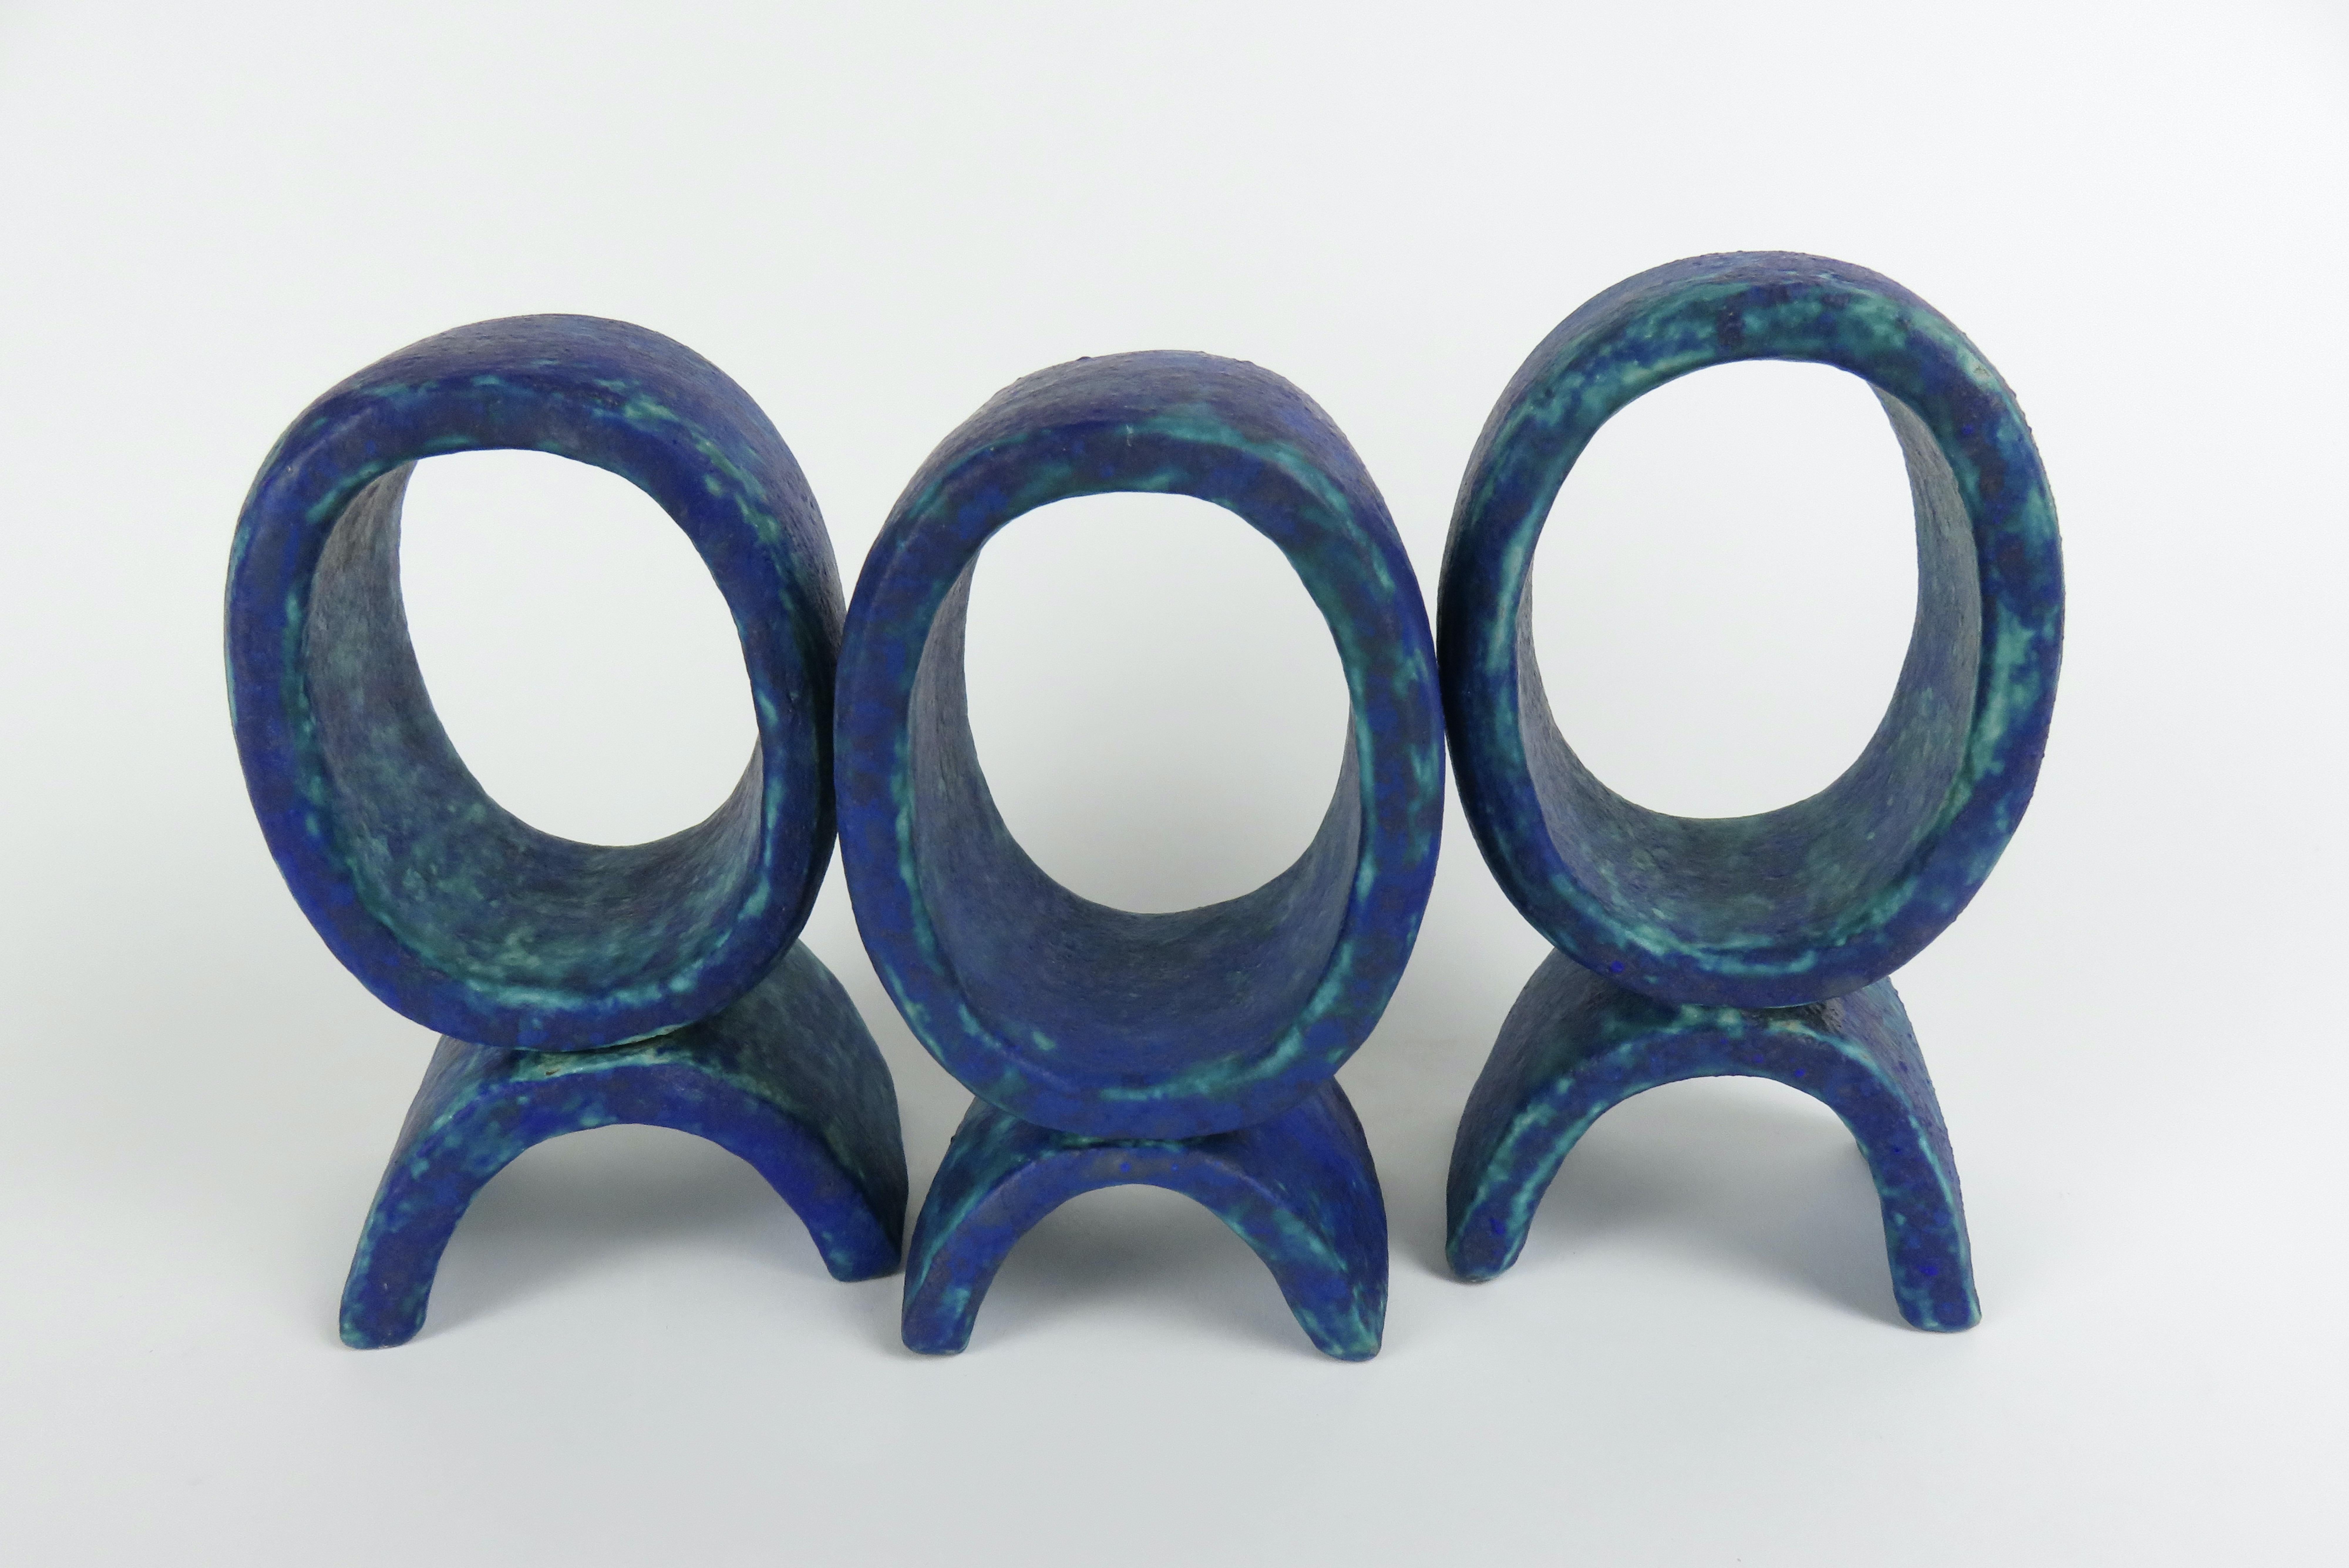 Mottled Turquoise and Deep Blue, 3 Ceramic Totems, Single Rings on Curved Legs In New Condition For Sale In New York, NY